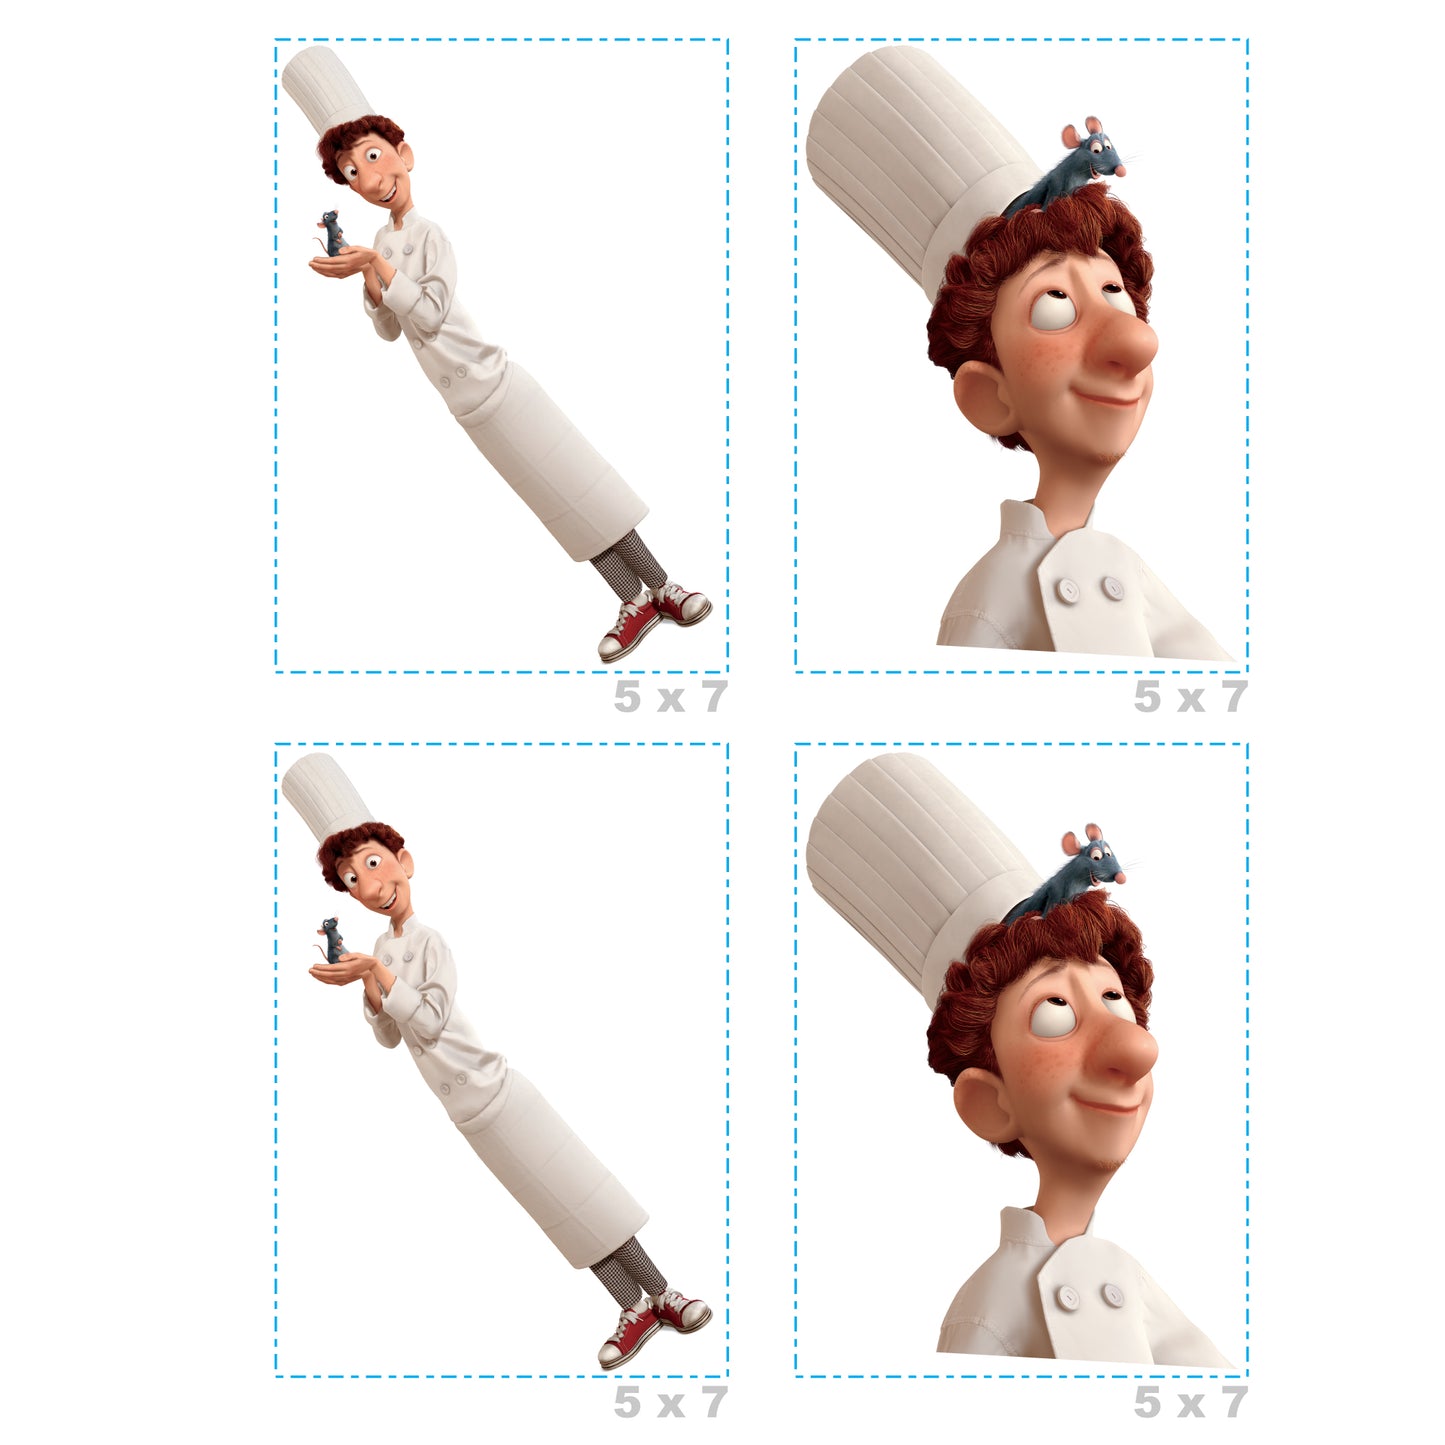 Sheet of 4 -Ratatouille: Remy & Linguini Buddies Minis - Officially Licensed Disney Removable Adhesive Decal